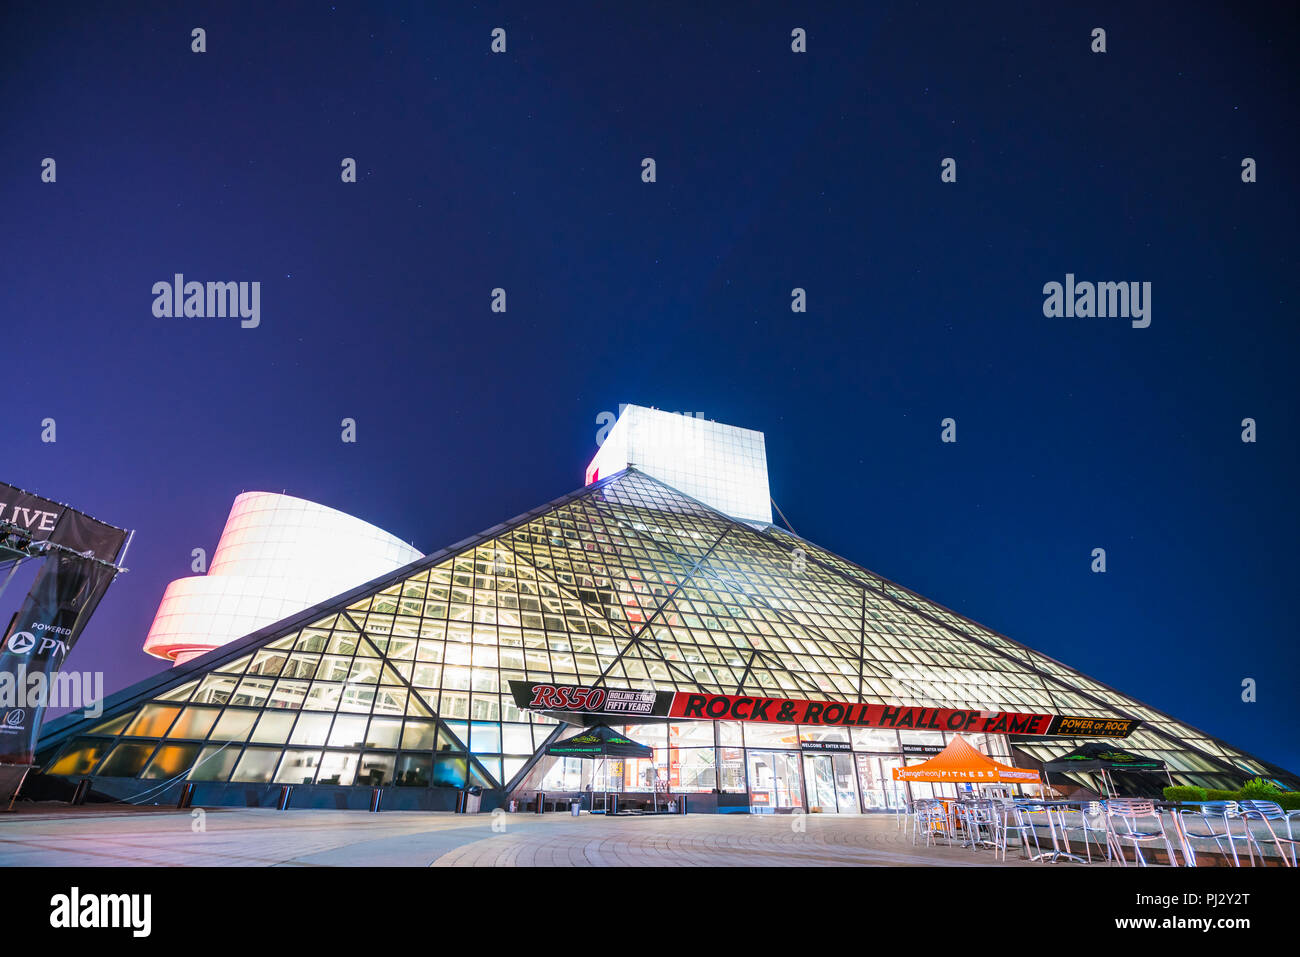 Rock and Roll Hall of Frame. Cleveland, Ohio, USA. 2-19-17: Rock and Roll Hall of Frame in der Nacht. Stockfoto